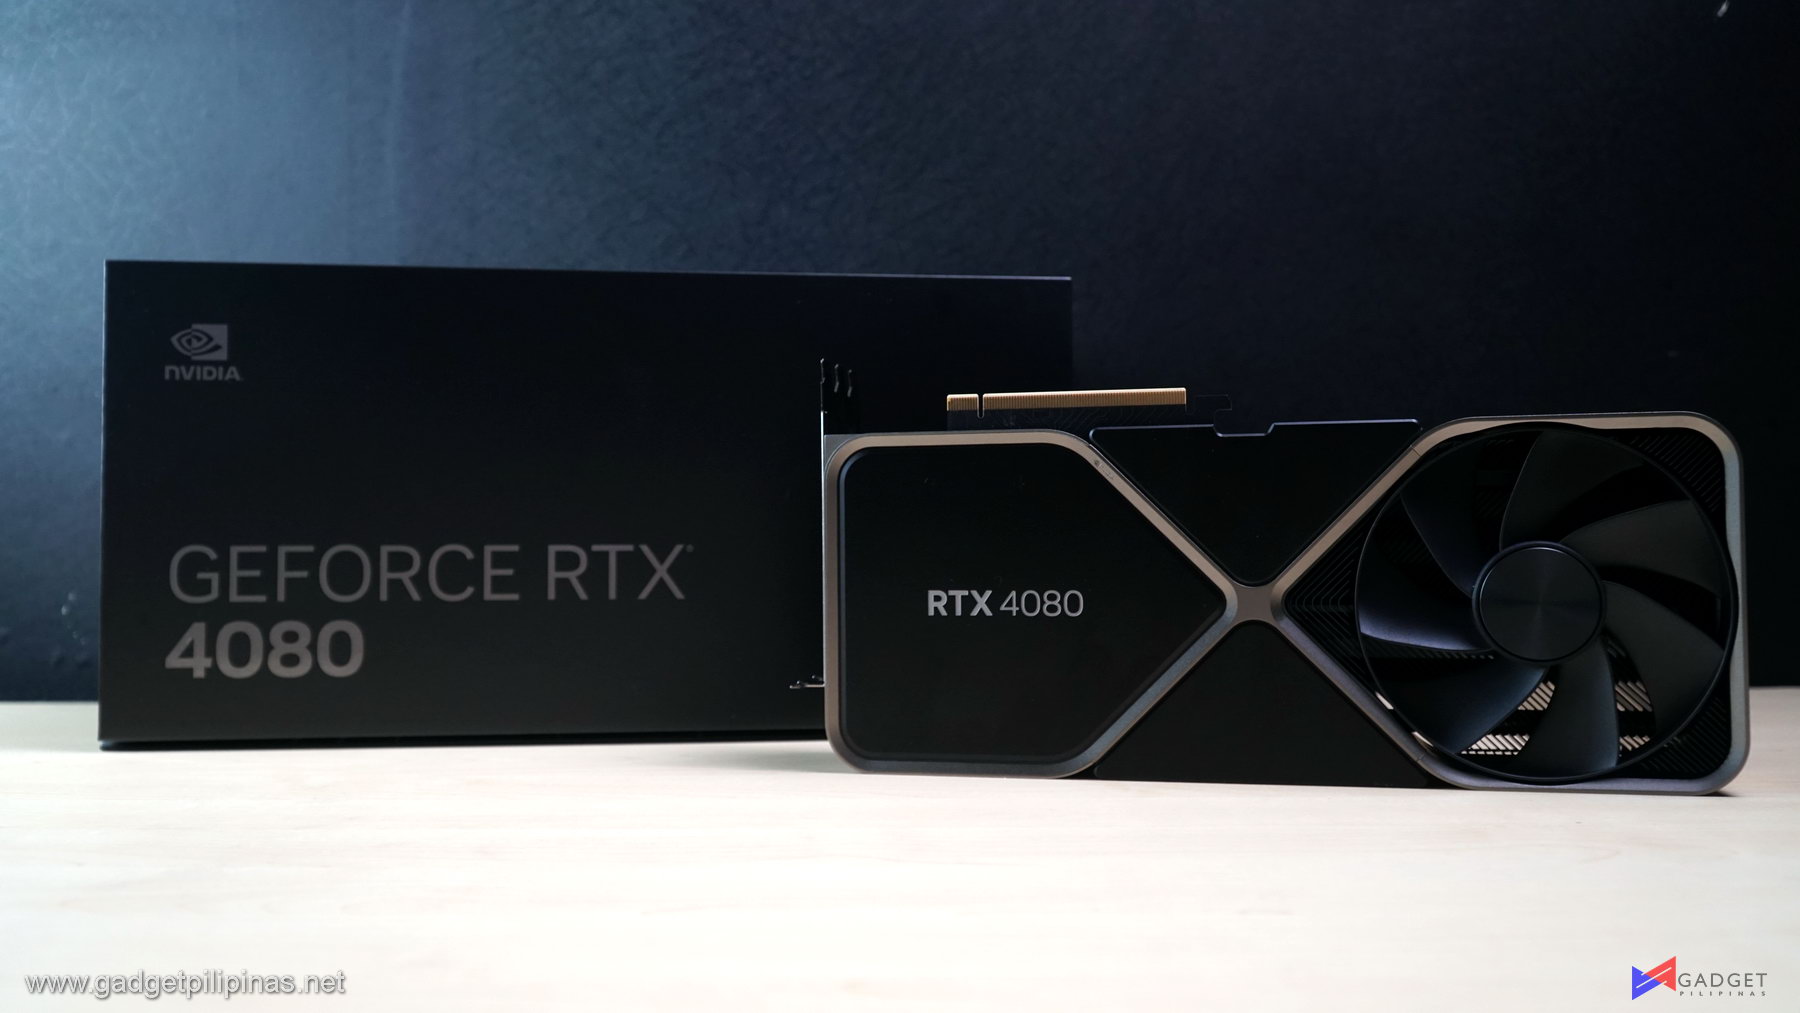 Nvidia 'Unlaunches' Poorly Named RTX 4080 12GB